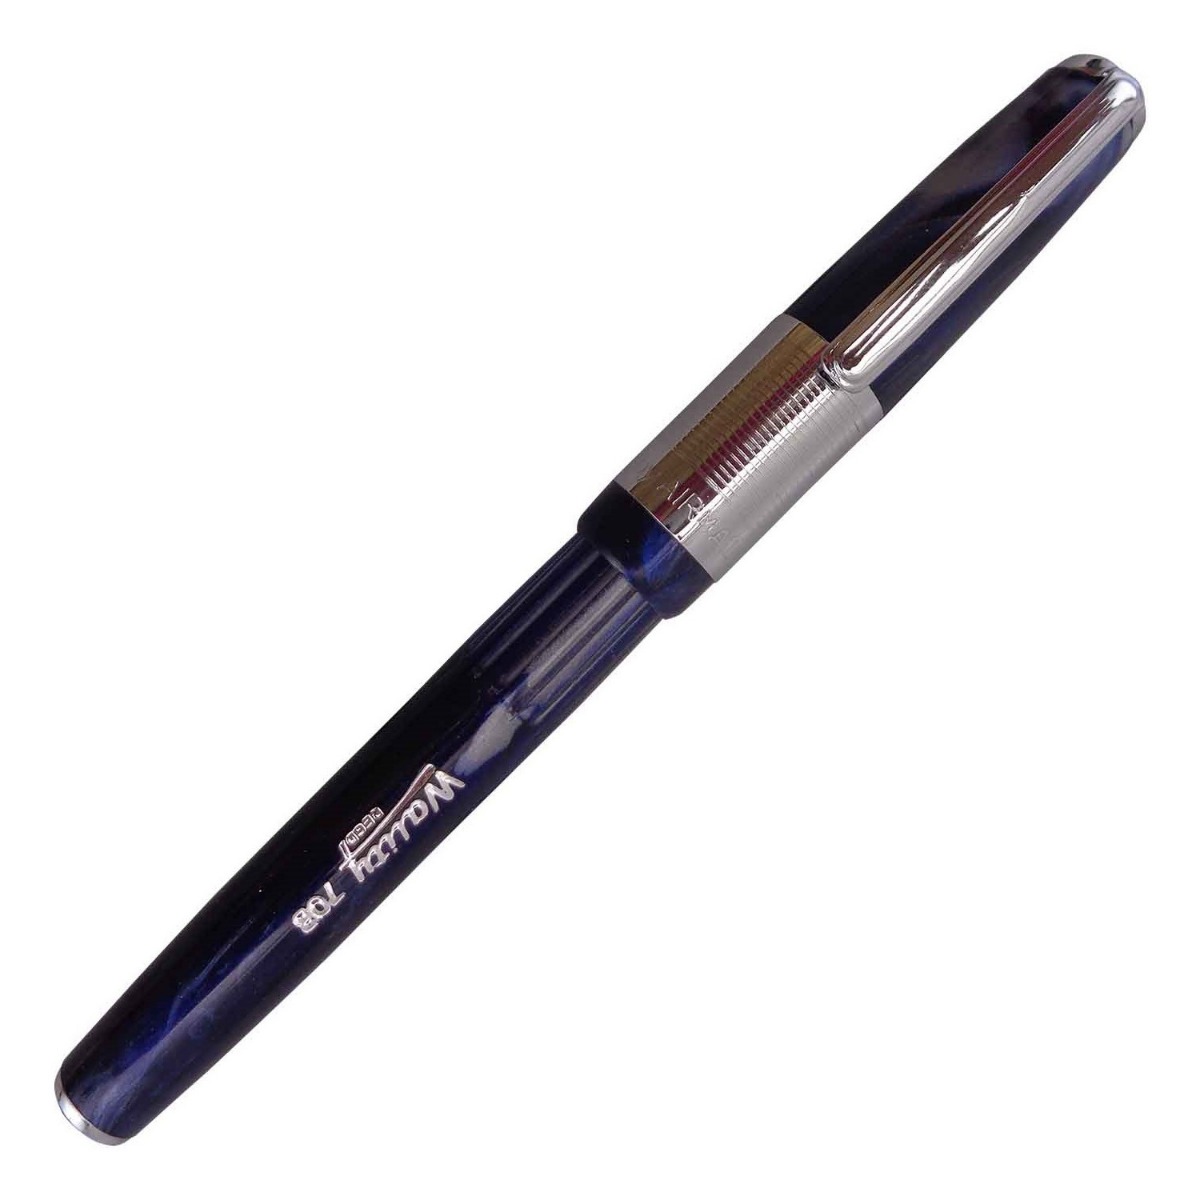 Airmail - Wality 70B Model:16026 Dark Blue Color Marble Finish Design Body With Silver Clip Cap Type Fine Tip Fountain Pen